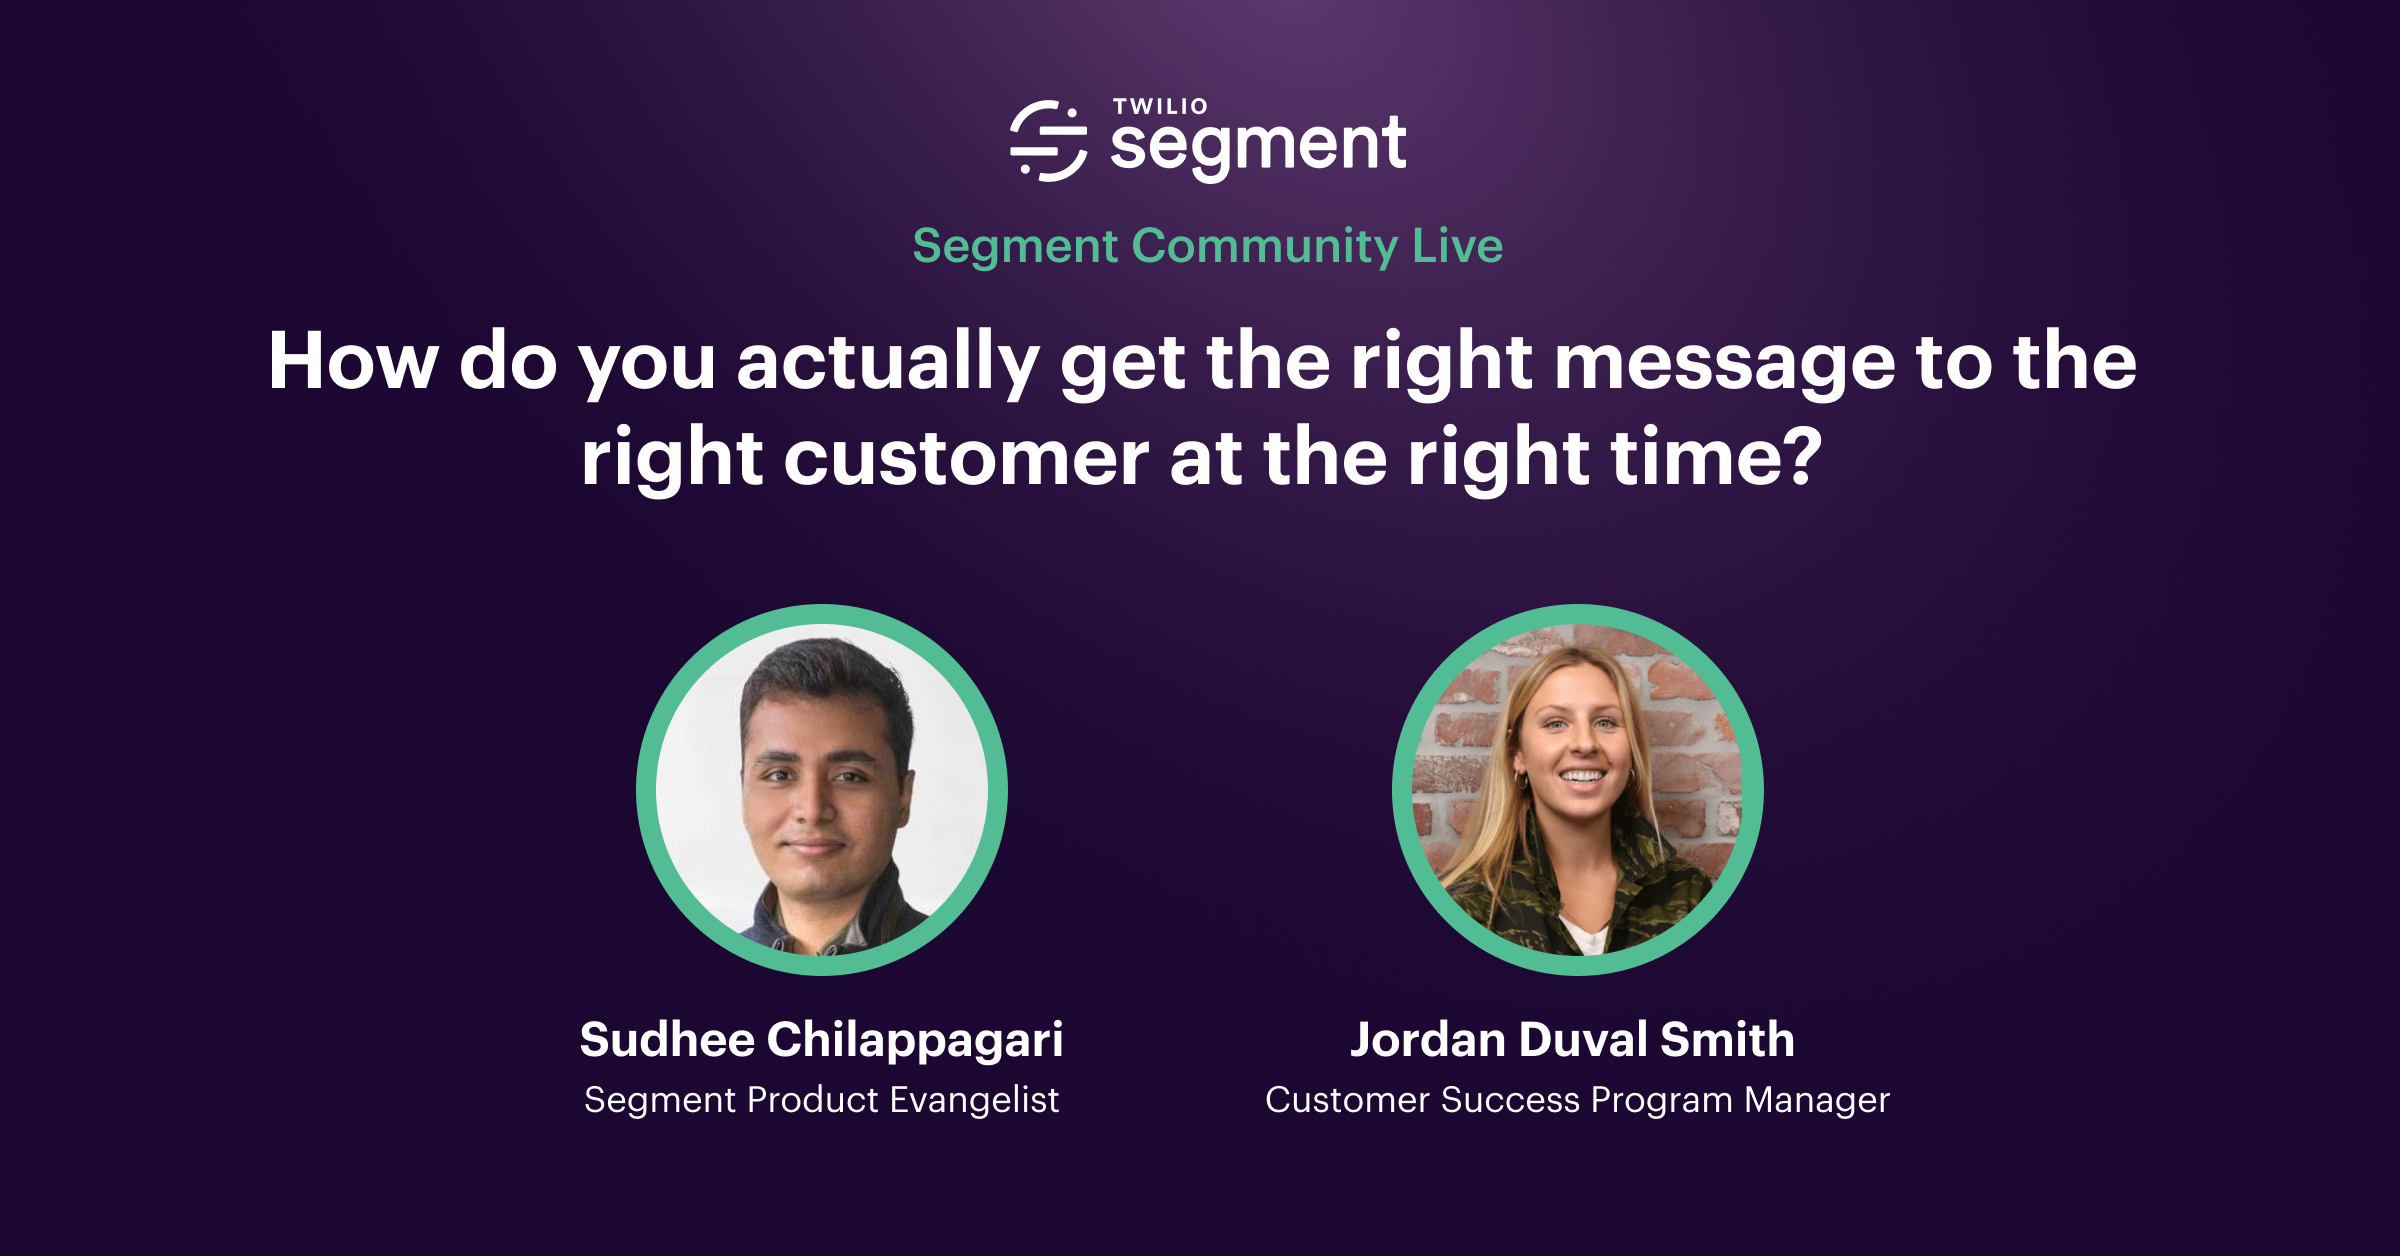 How to get the right message to the right customer at the right time